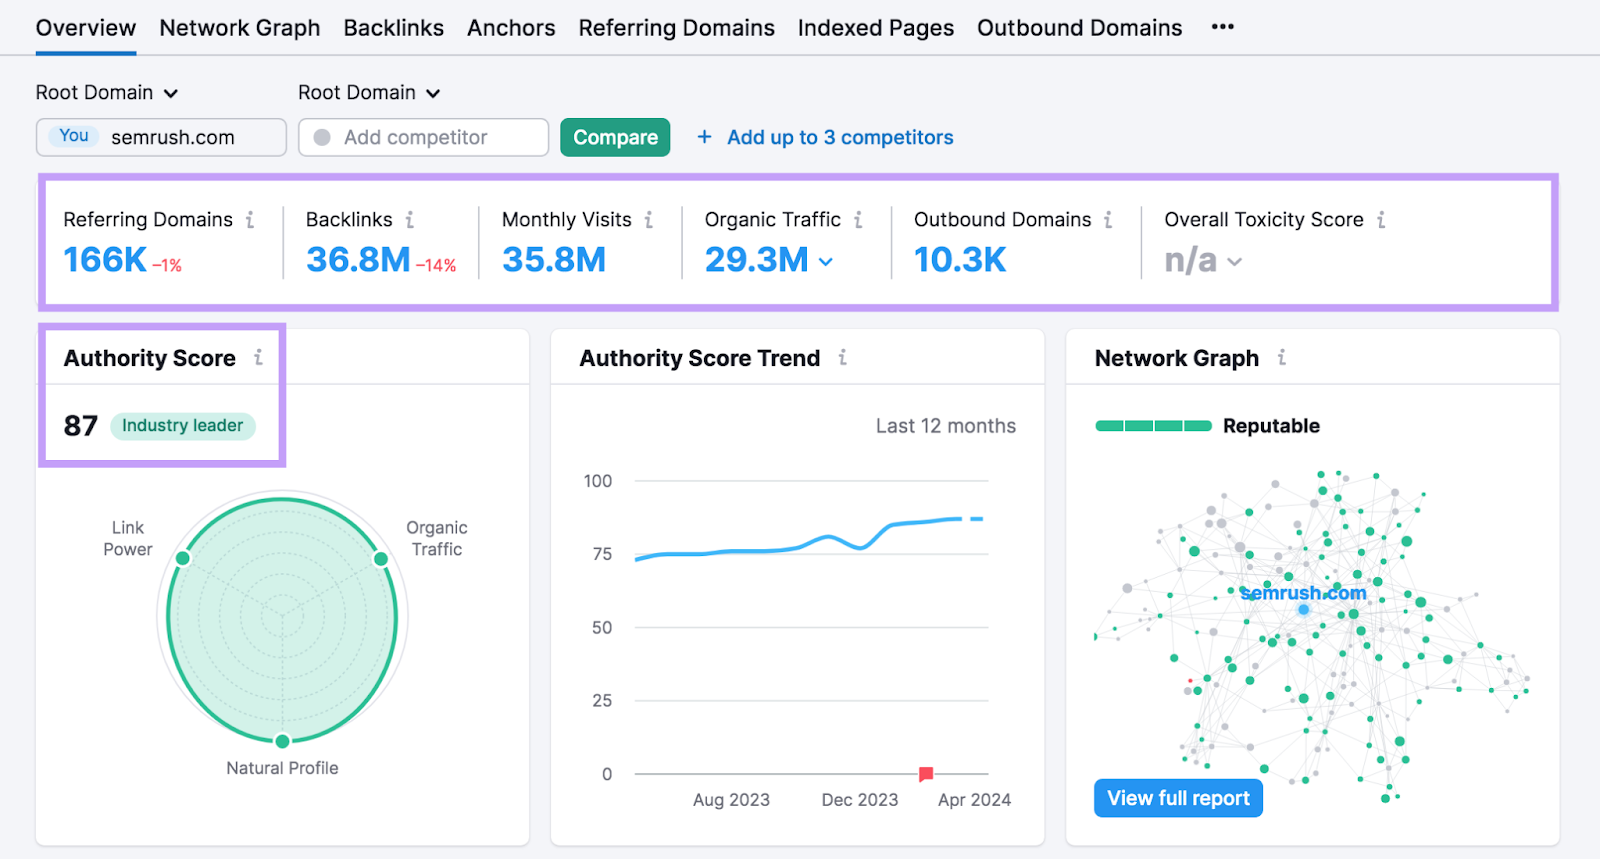 “Overview” report in Backlink Analytics tool shows domain's authority score, referring domains, number of backlinks, monthly visits, organic traffic, and other data